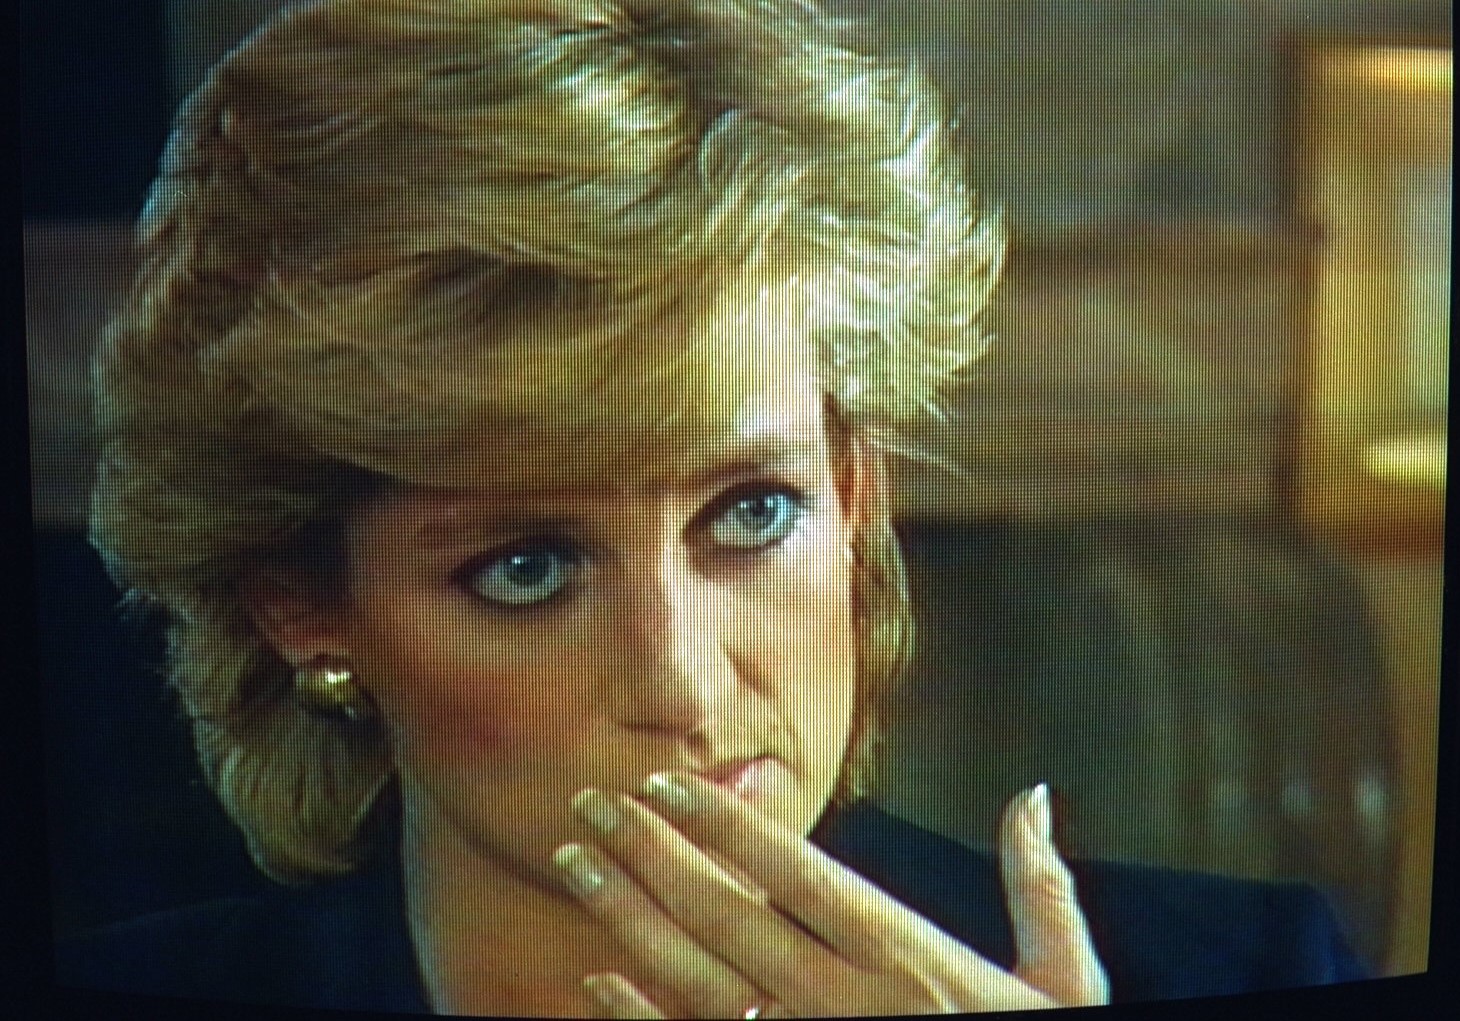 Headshot of Princess Diana holding her hand to her face during 'Panorama' interview